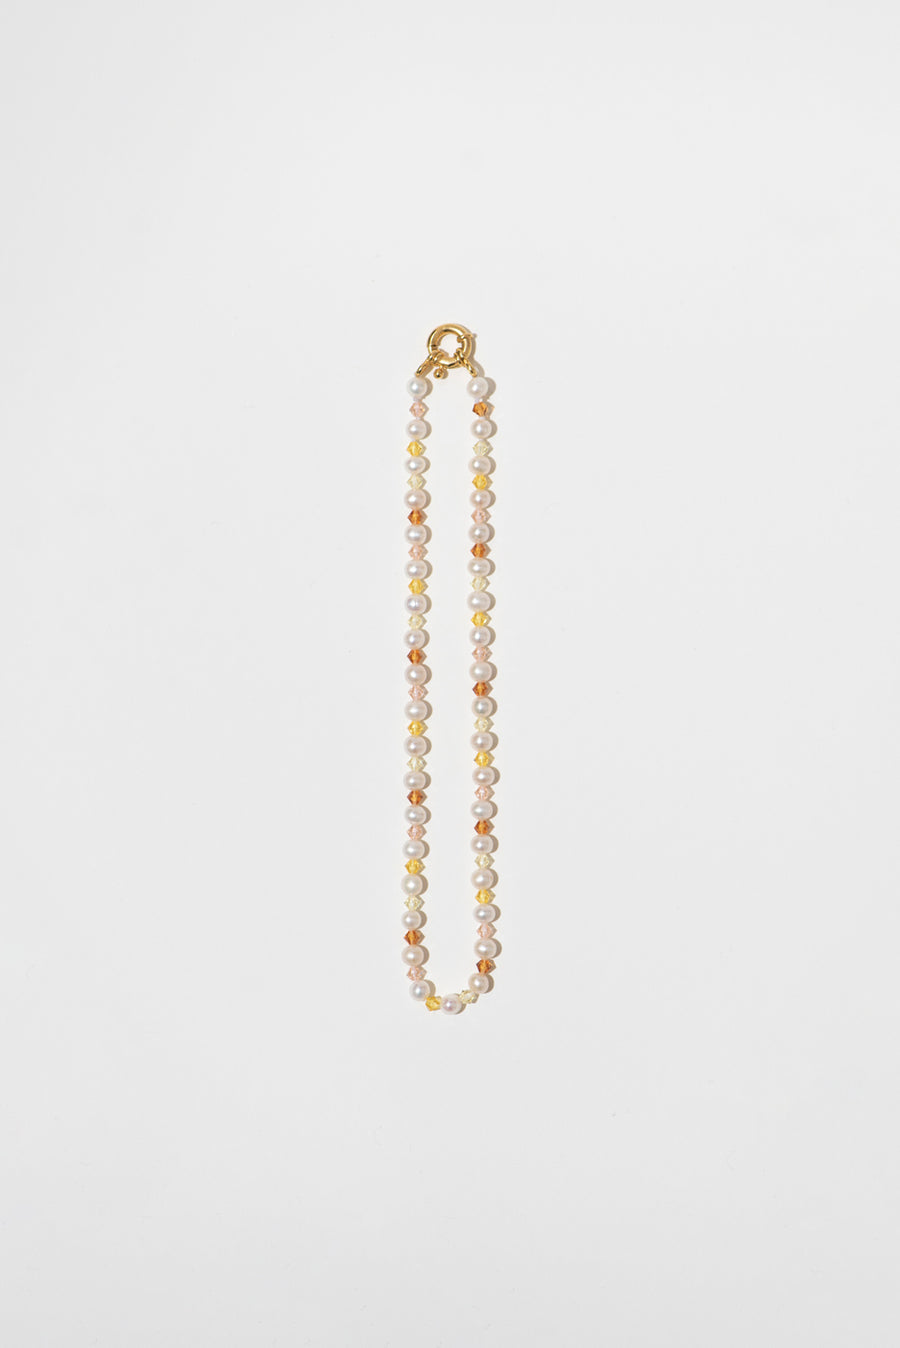 The Sunset Pearl Necklace